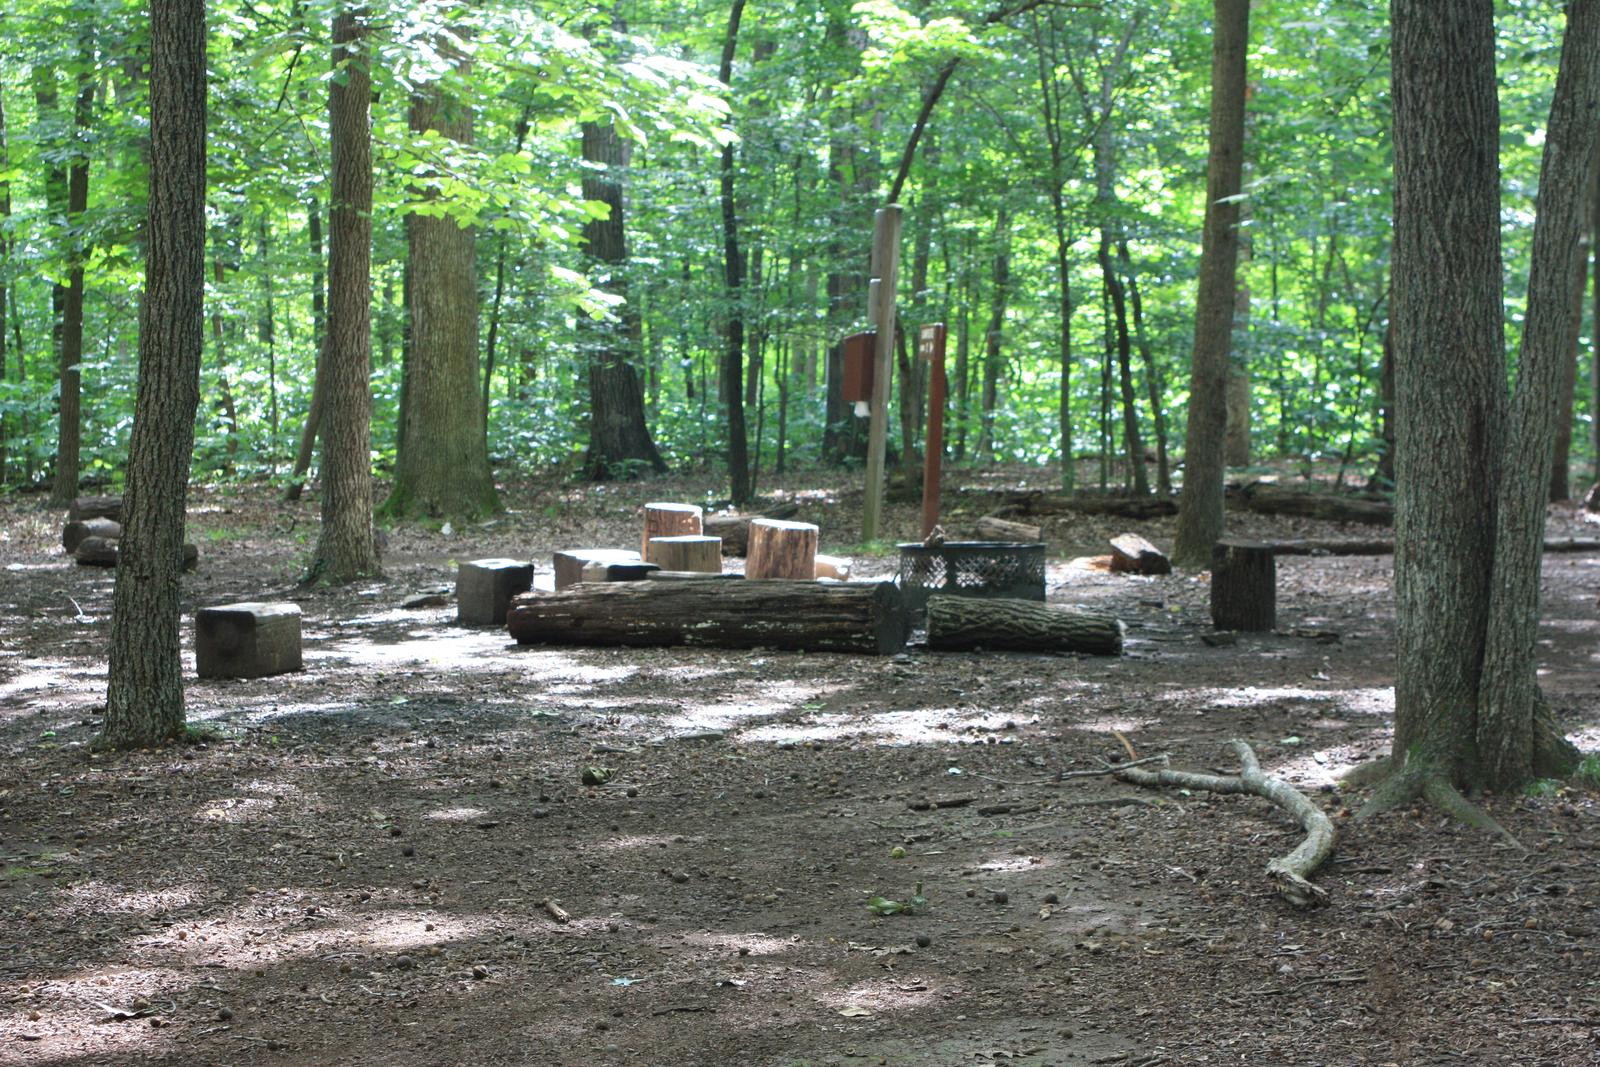 Campsite around fire pit with large tree stumpsCampsite around fire pit with large tree stumps for sitting